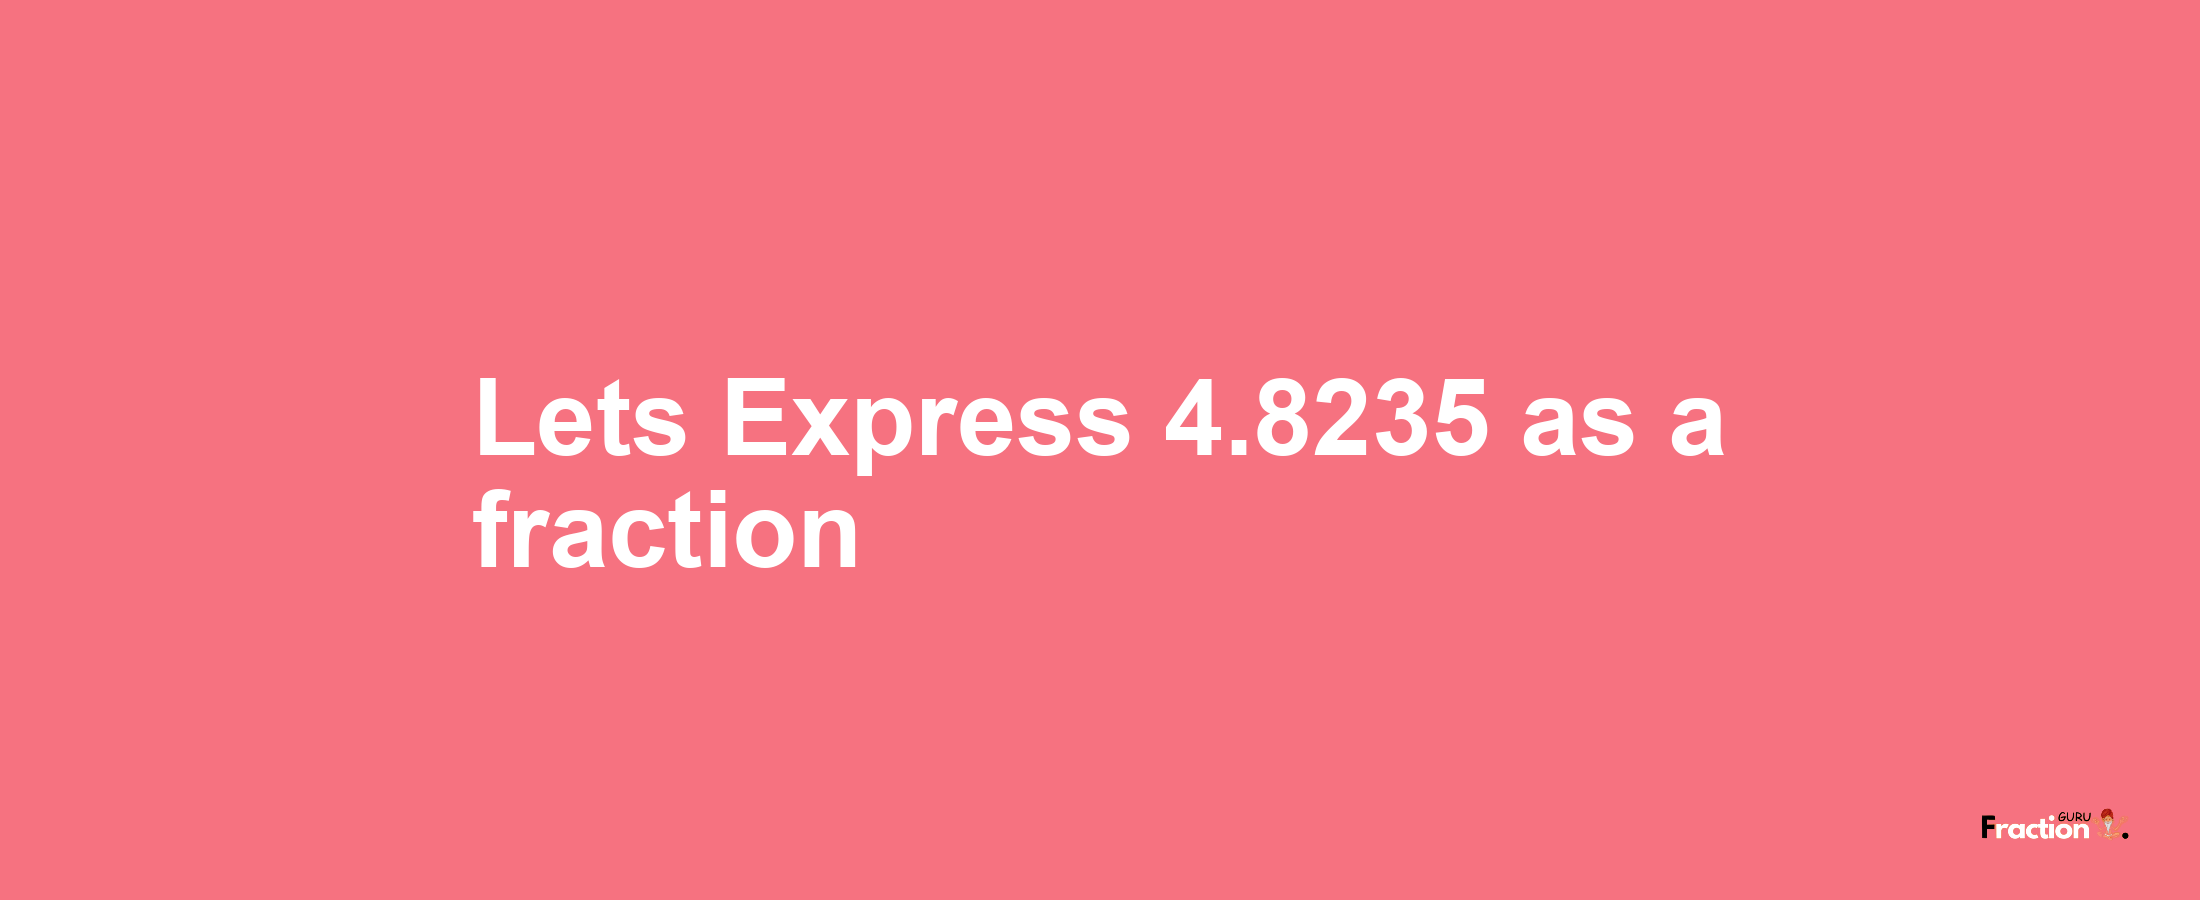 Lets Express 4.8235 as afraction